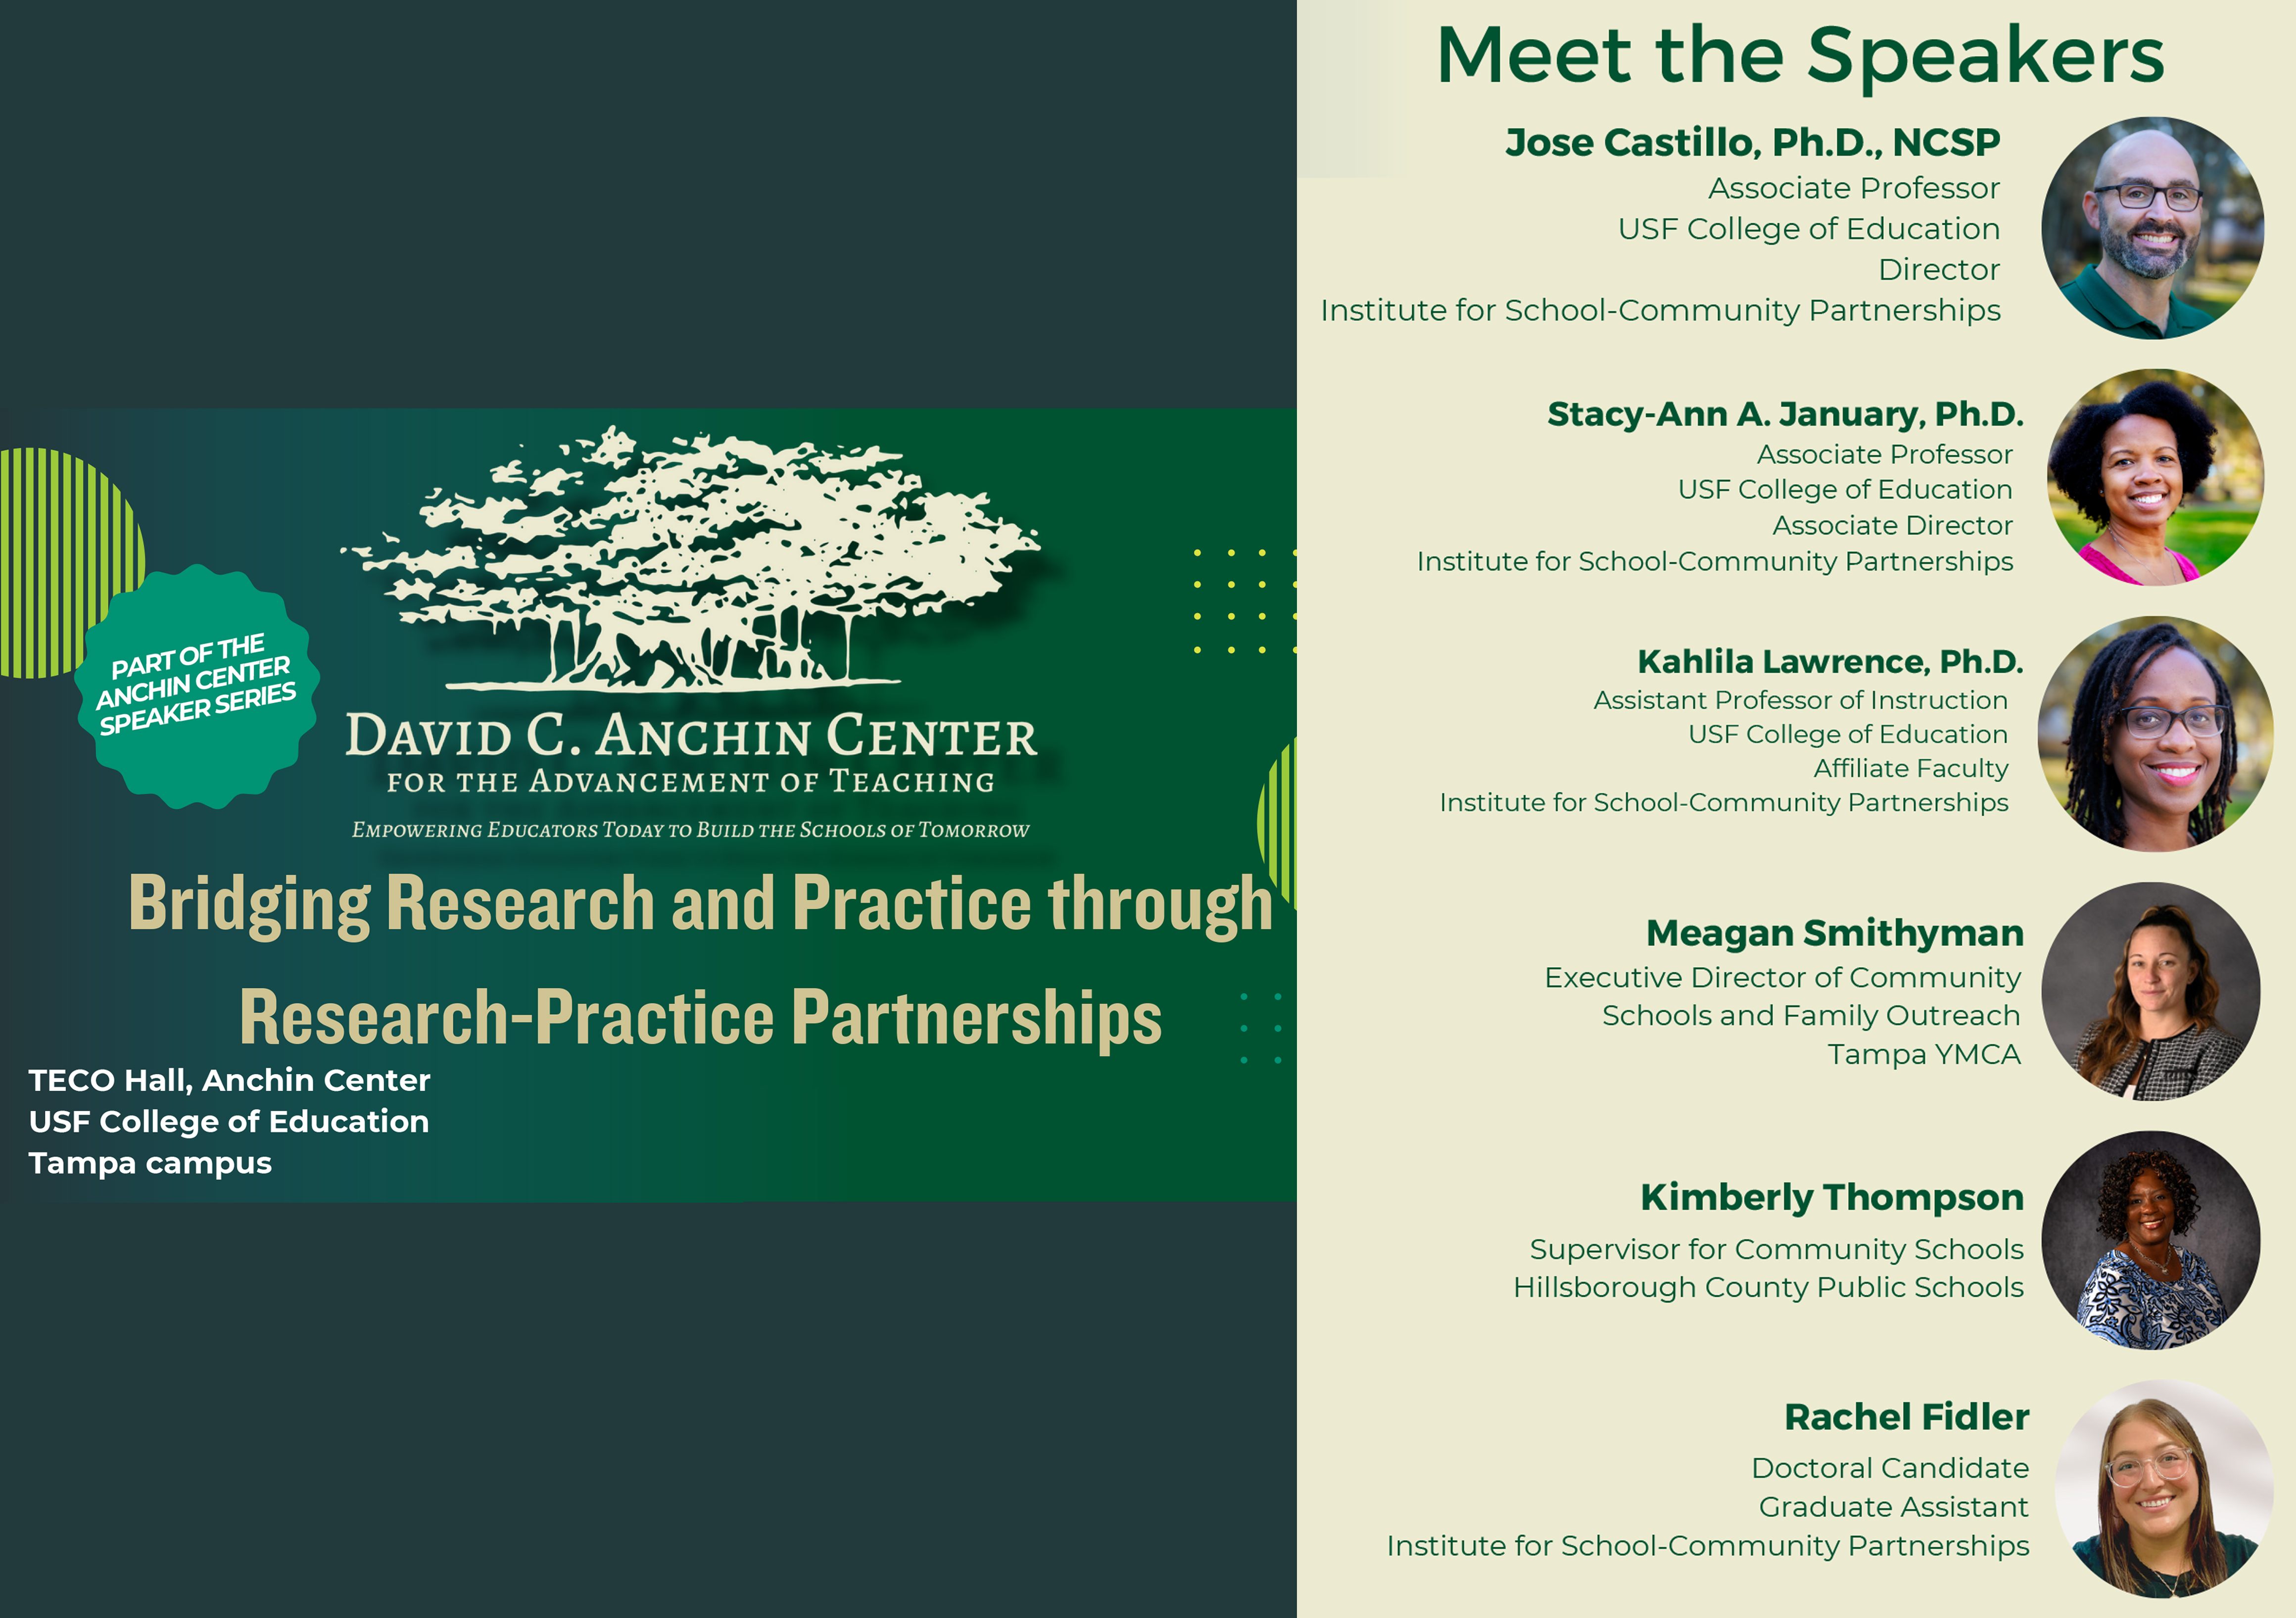 Bridging Research and Practice through Research-Practice Partnerships